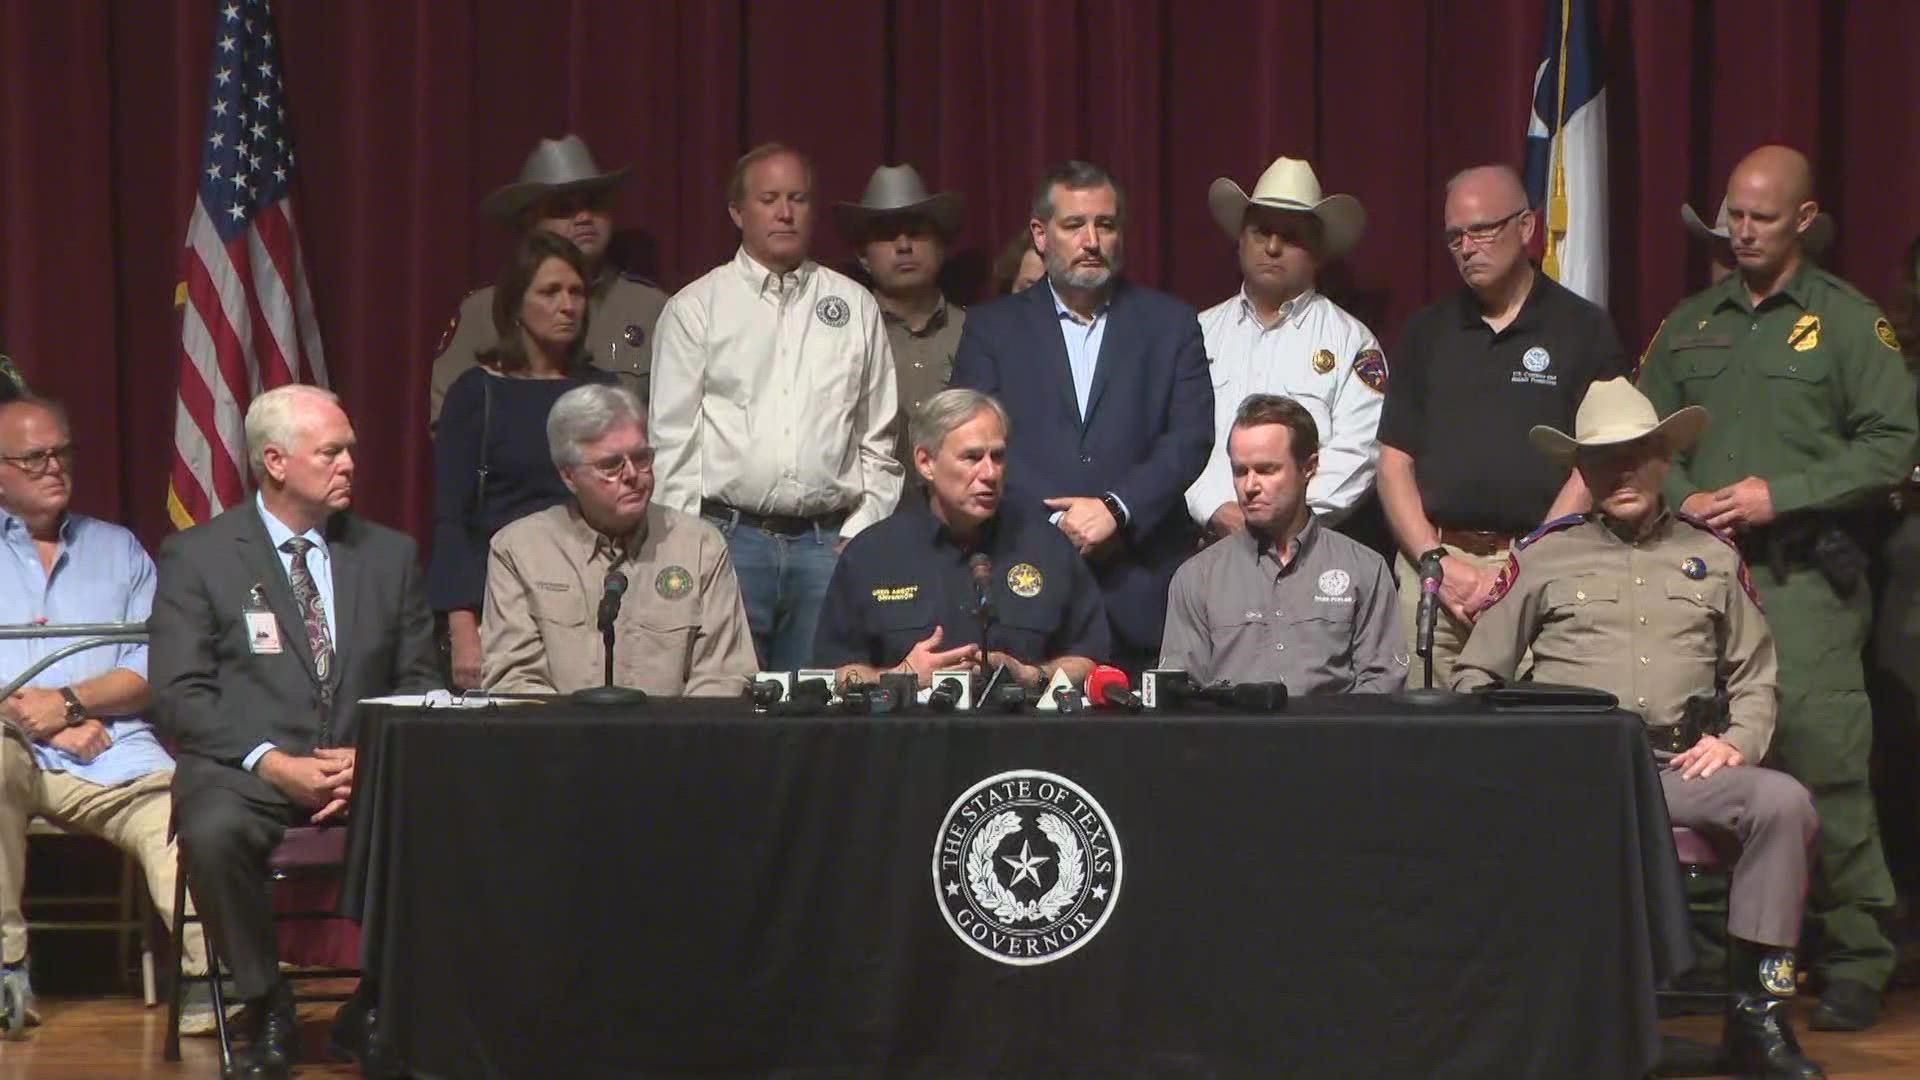 "This is up to the people of Texas: Have you had enough, have you seen enough tiny caskets yet, are you insistent that the governor call us back to act?"